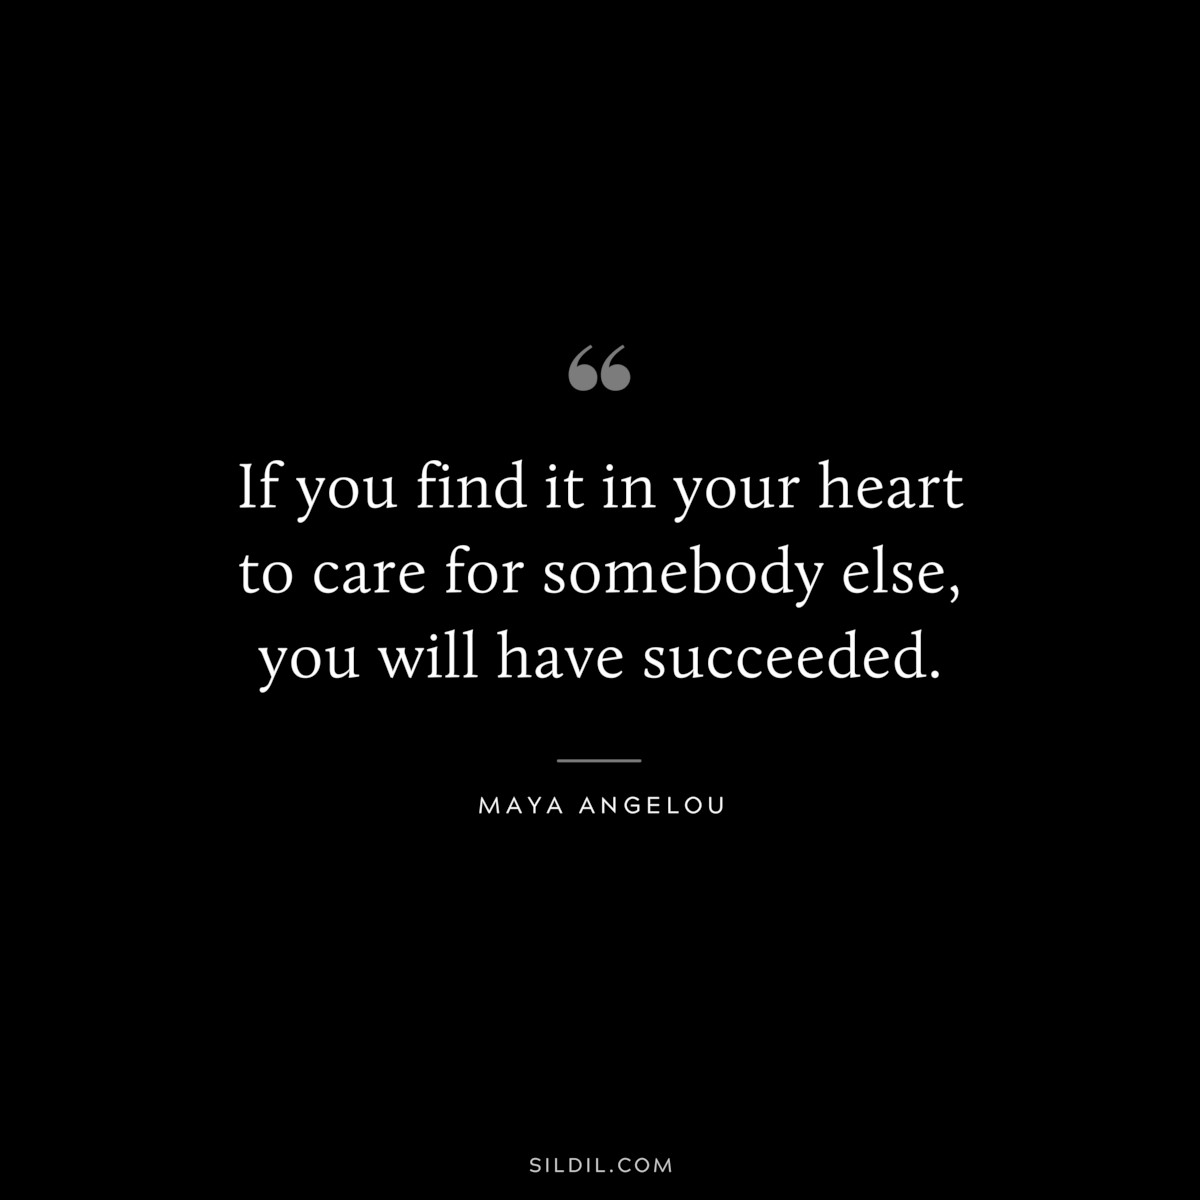 If you find it in your heart to care for somebody else, you will have succeeded. ― Maya Angelou